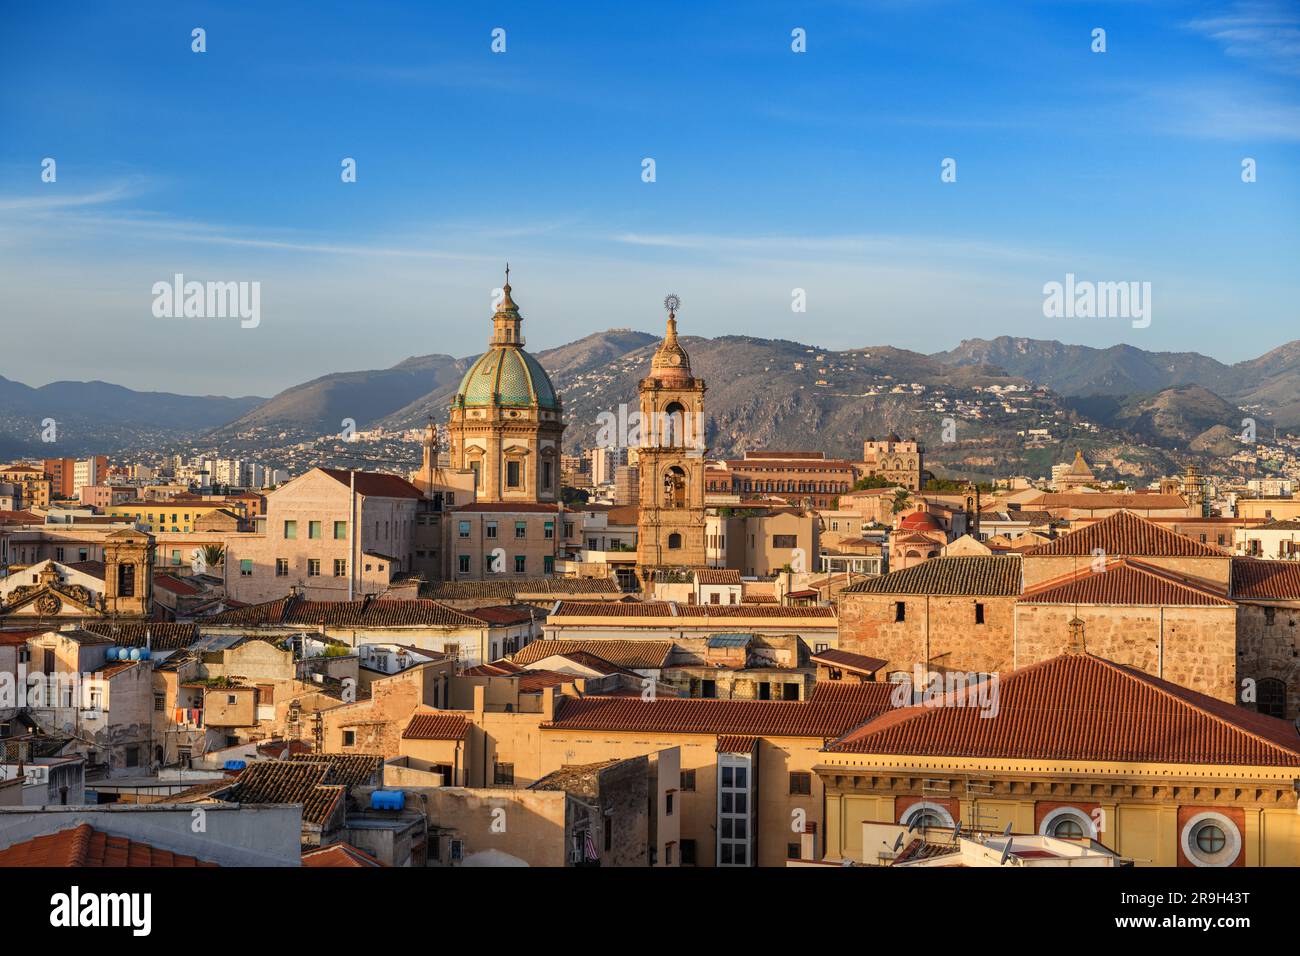 Palermo, Sicily town skyline with landmark towers in the morning. Stock Photo